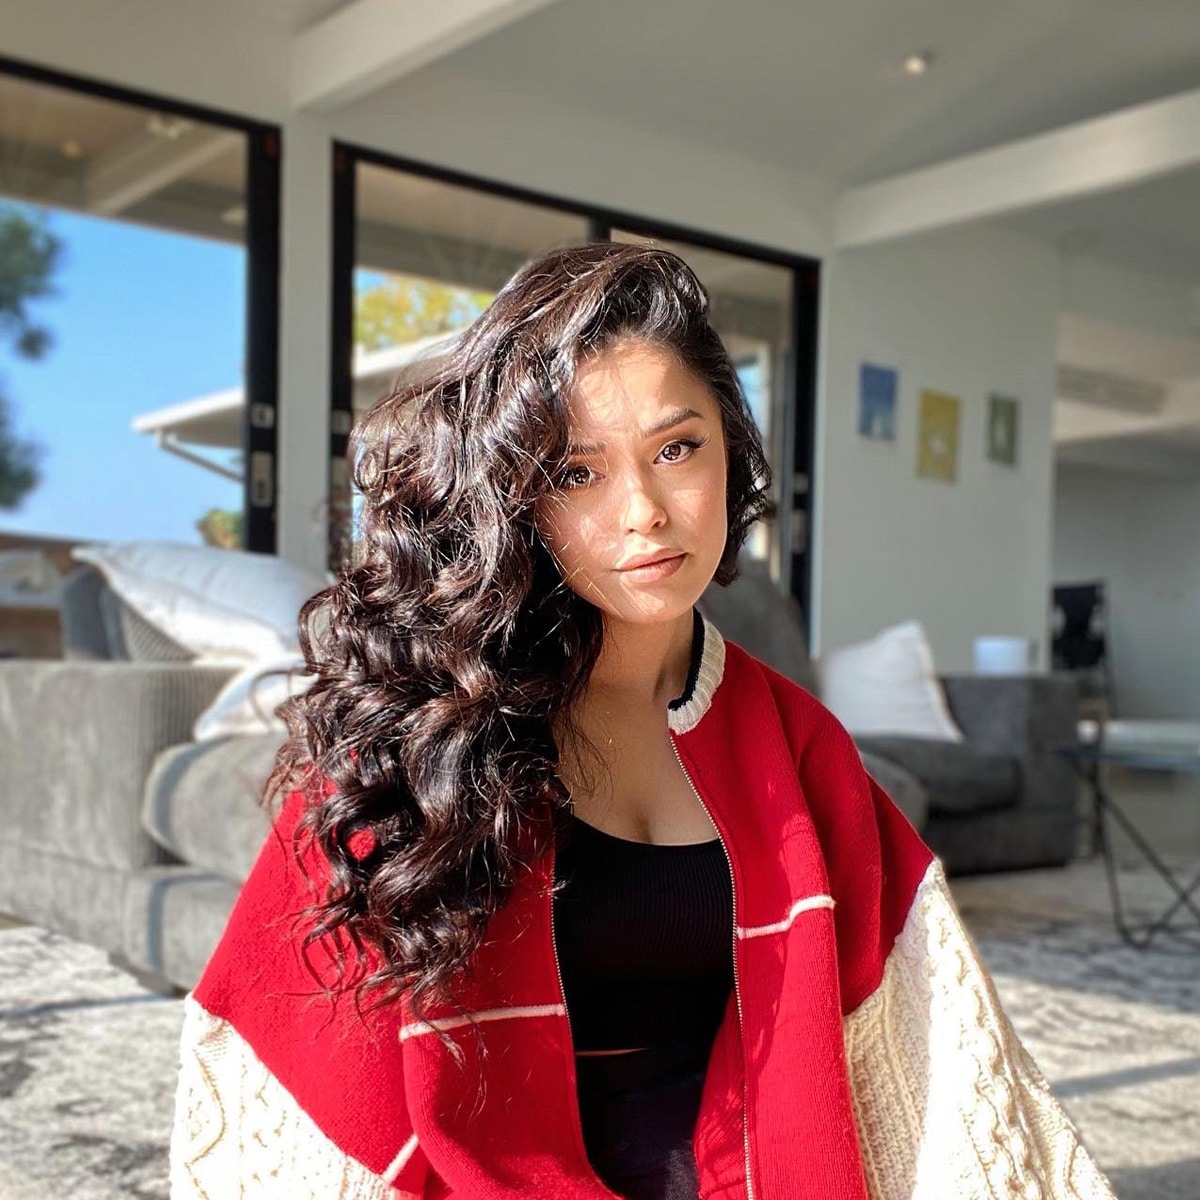 internet personality valkyrae poses in red sweater